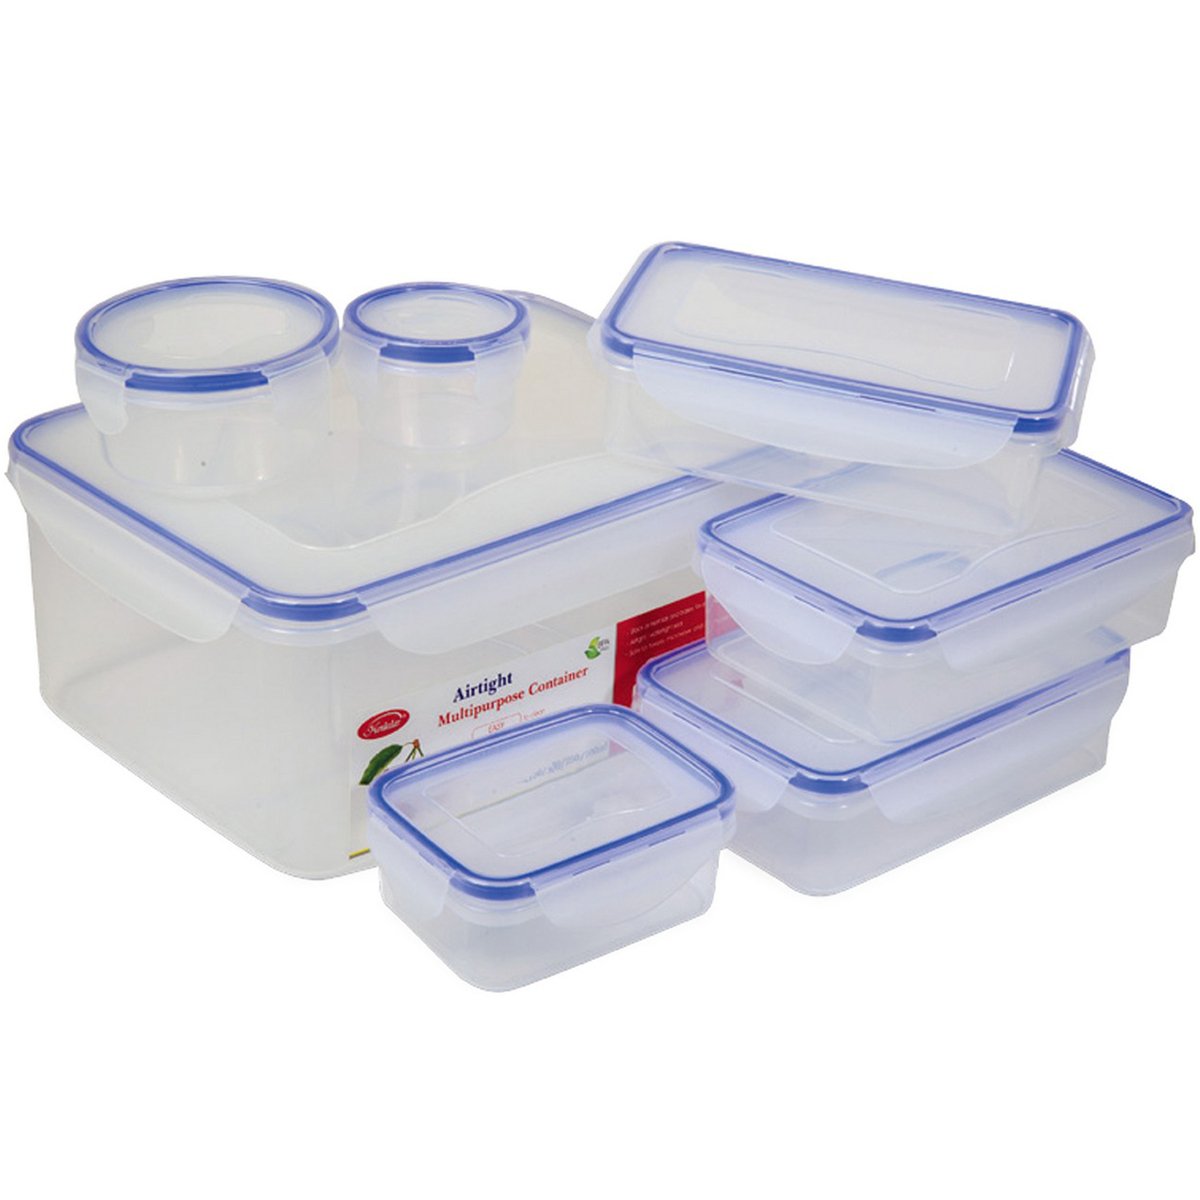 Henledar Food Containers 7pcs